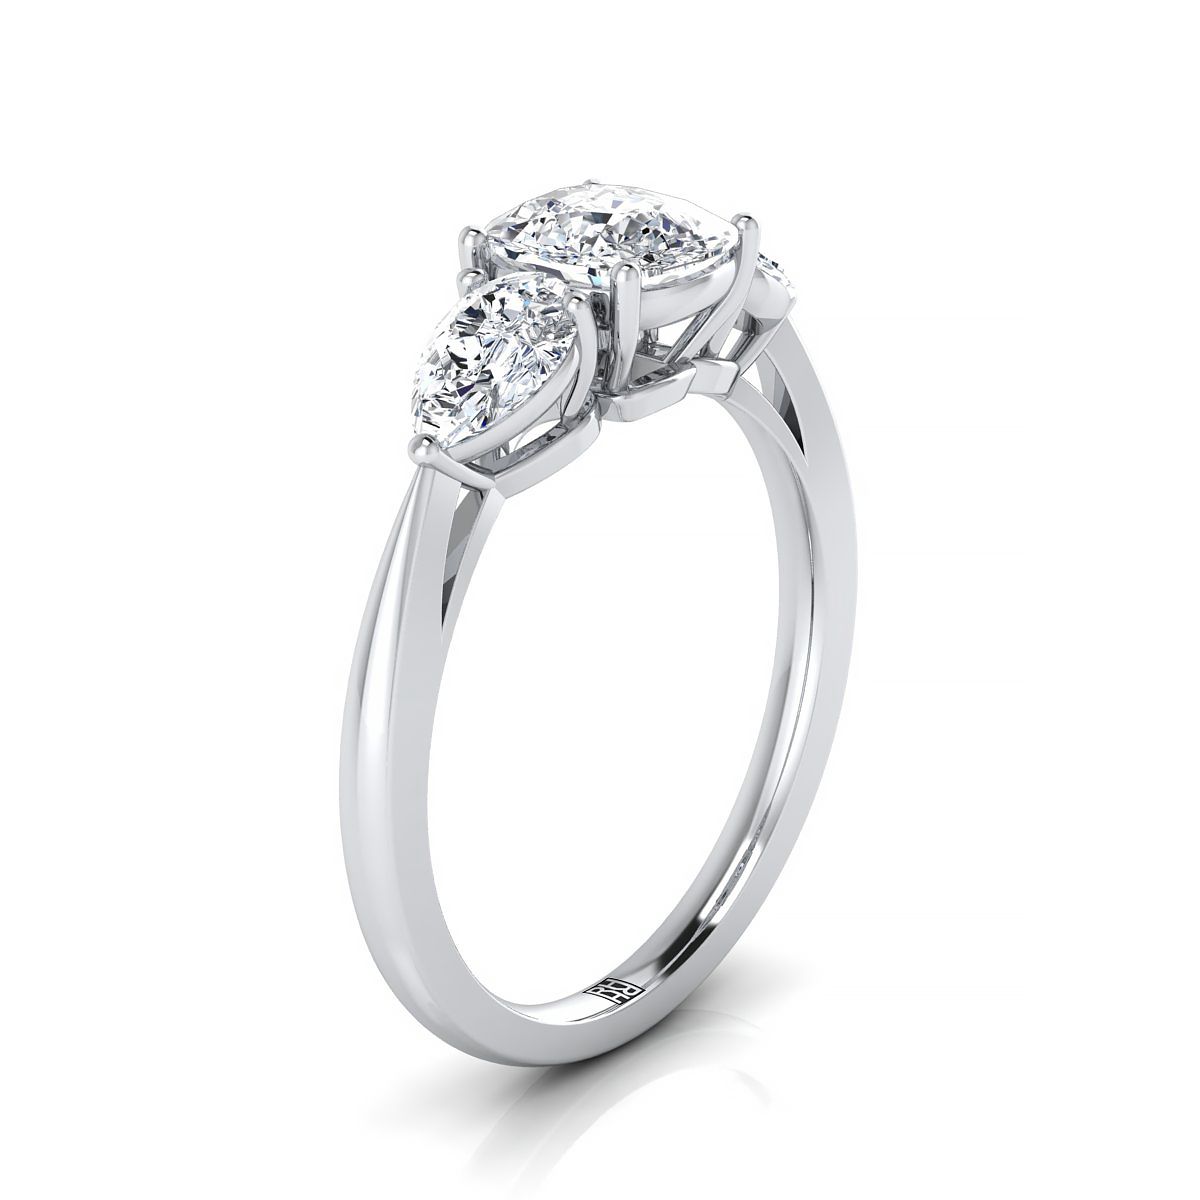 14K White Gold Cushion Diamond Perfectly Matched Pear Shaped Three Diamond Engagement Ring -7/8ctw